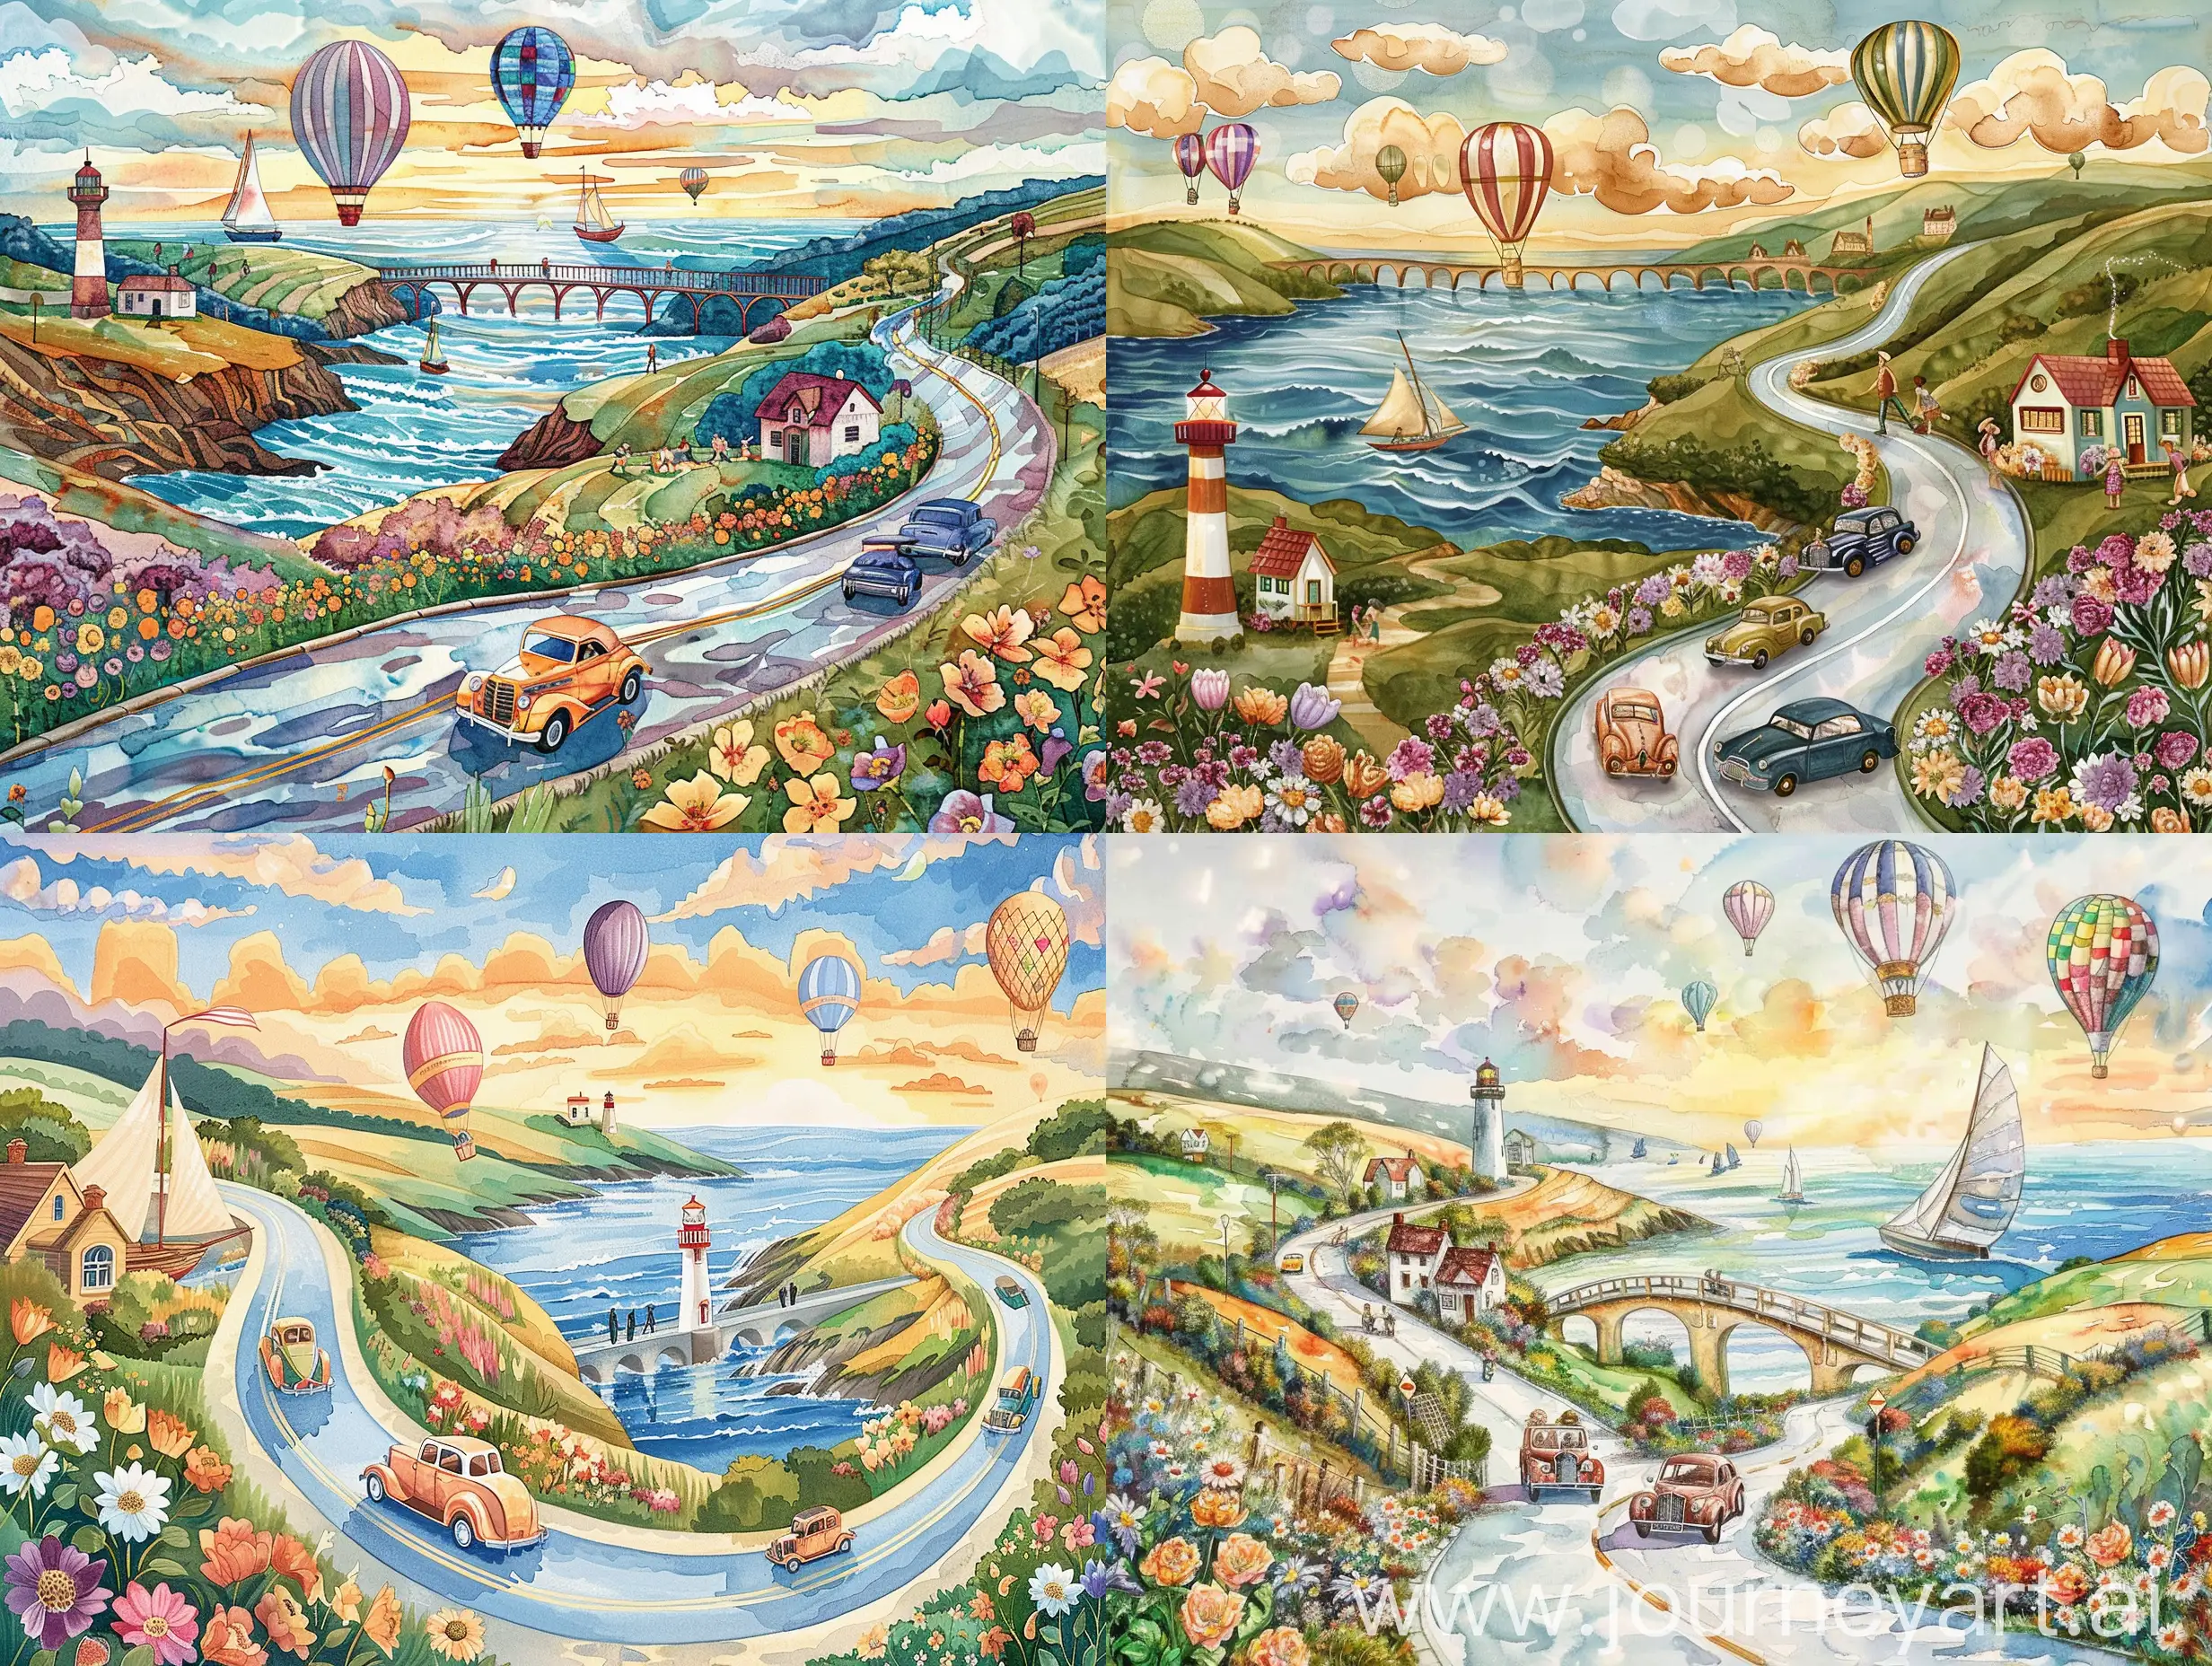 illustration of a long winding road, along the sea side to a bridge over sea, 1 old sail boat, lighthouse, cottage, flowers along the road side, hills, 3 classic vintage cars drivern by people, spread out along the road, hot air balloons, sunrise fluffy clouds, textured painterly fantasy artistic, alcohol ink mix with watercolor style, aesthetic, best ever, wonderful, vibrant light pastel and transparent color